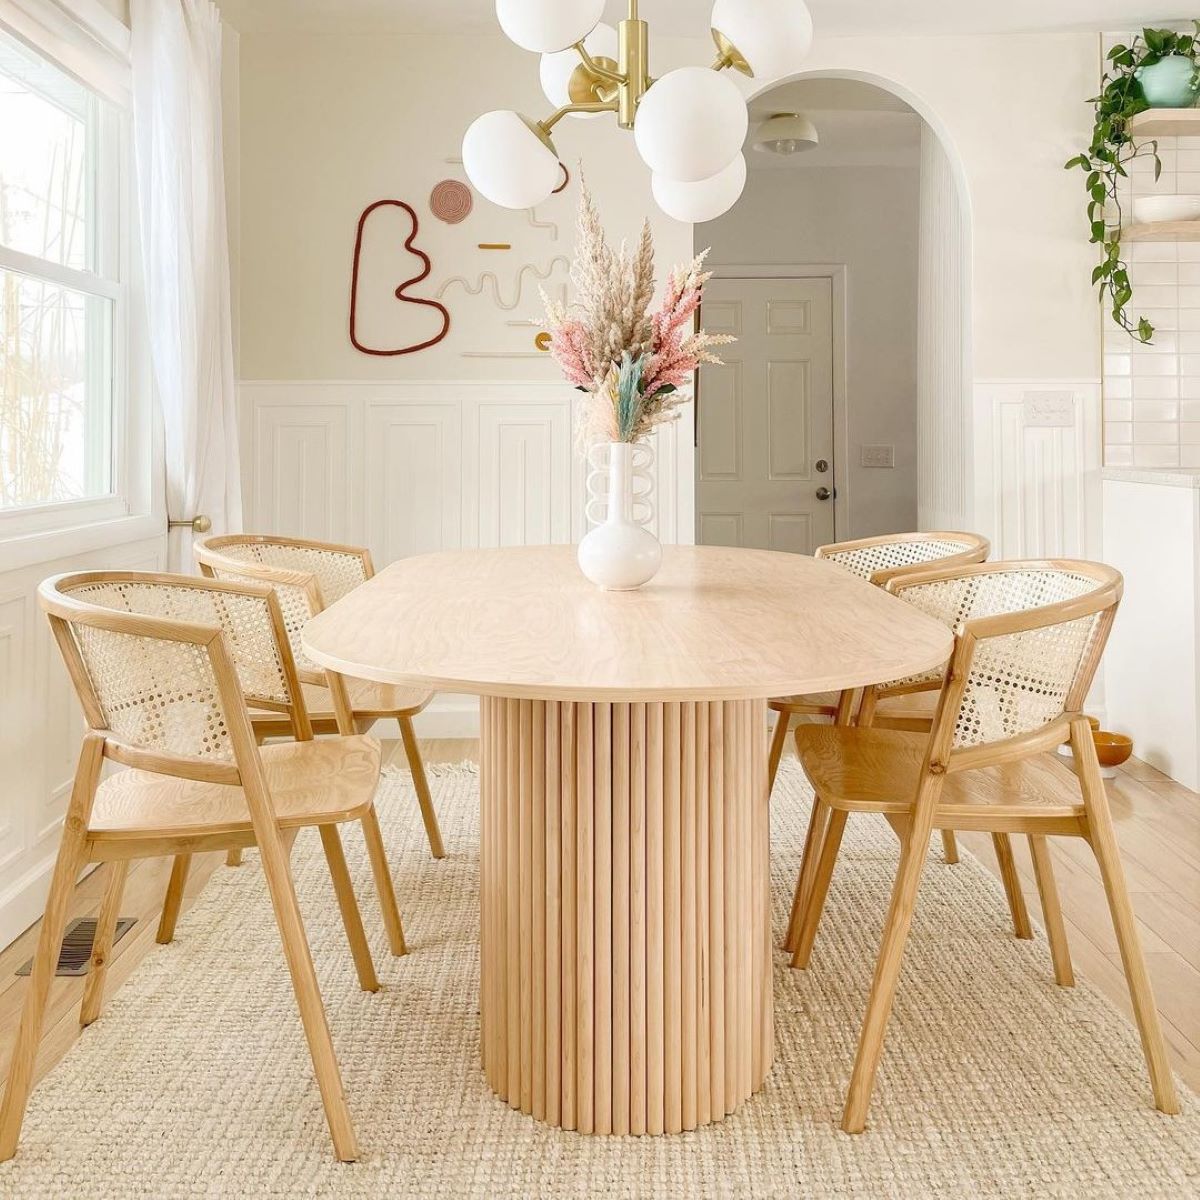 How To Make A Small Dining Room Look Bigger